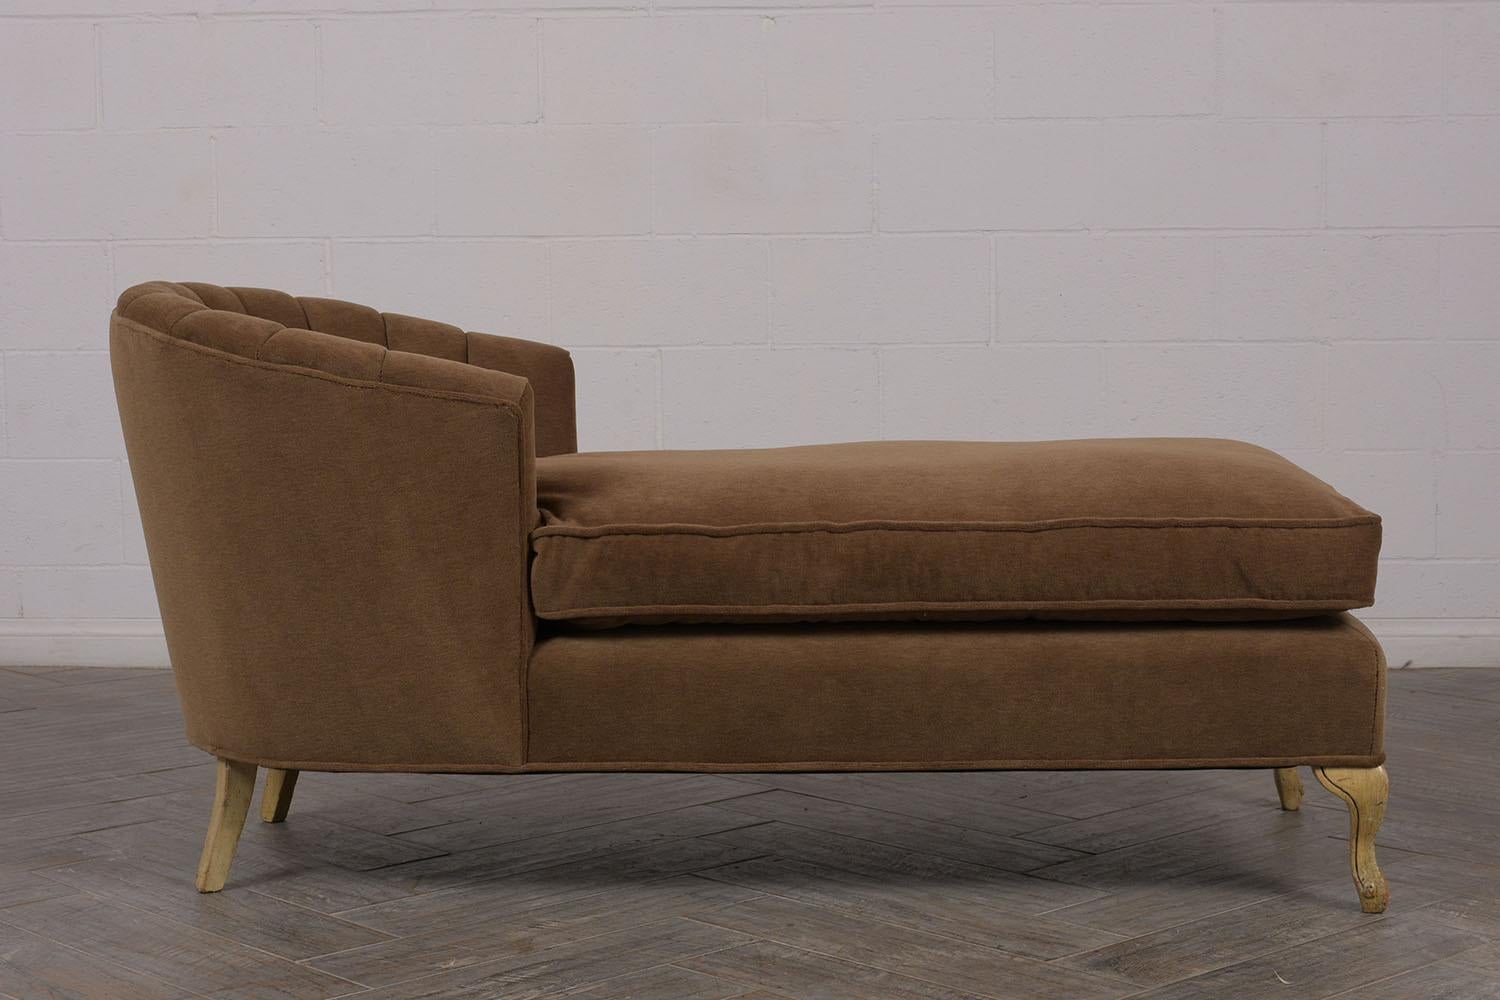 Early 20th Century Hollywood Regency Style Chaise Lounge